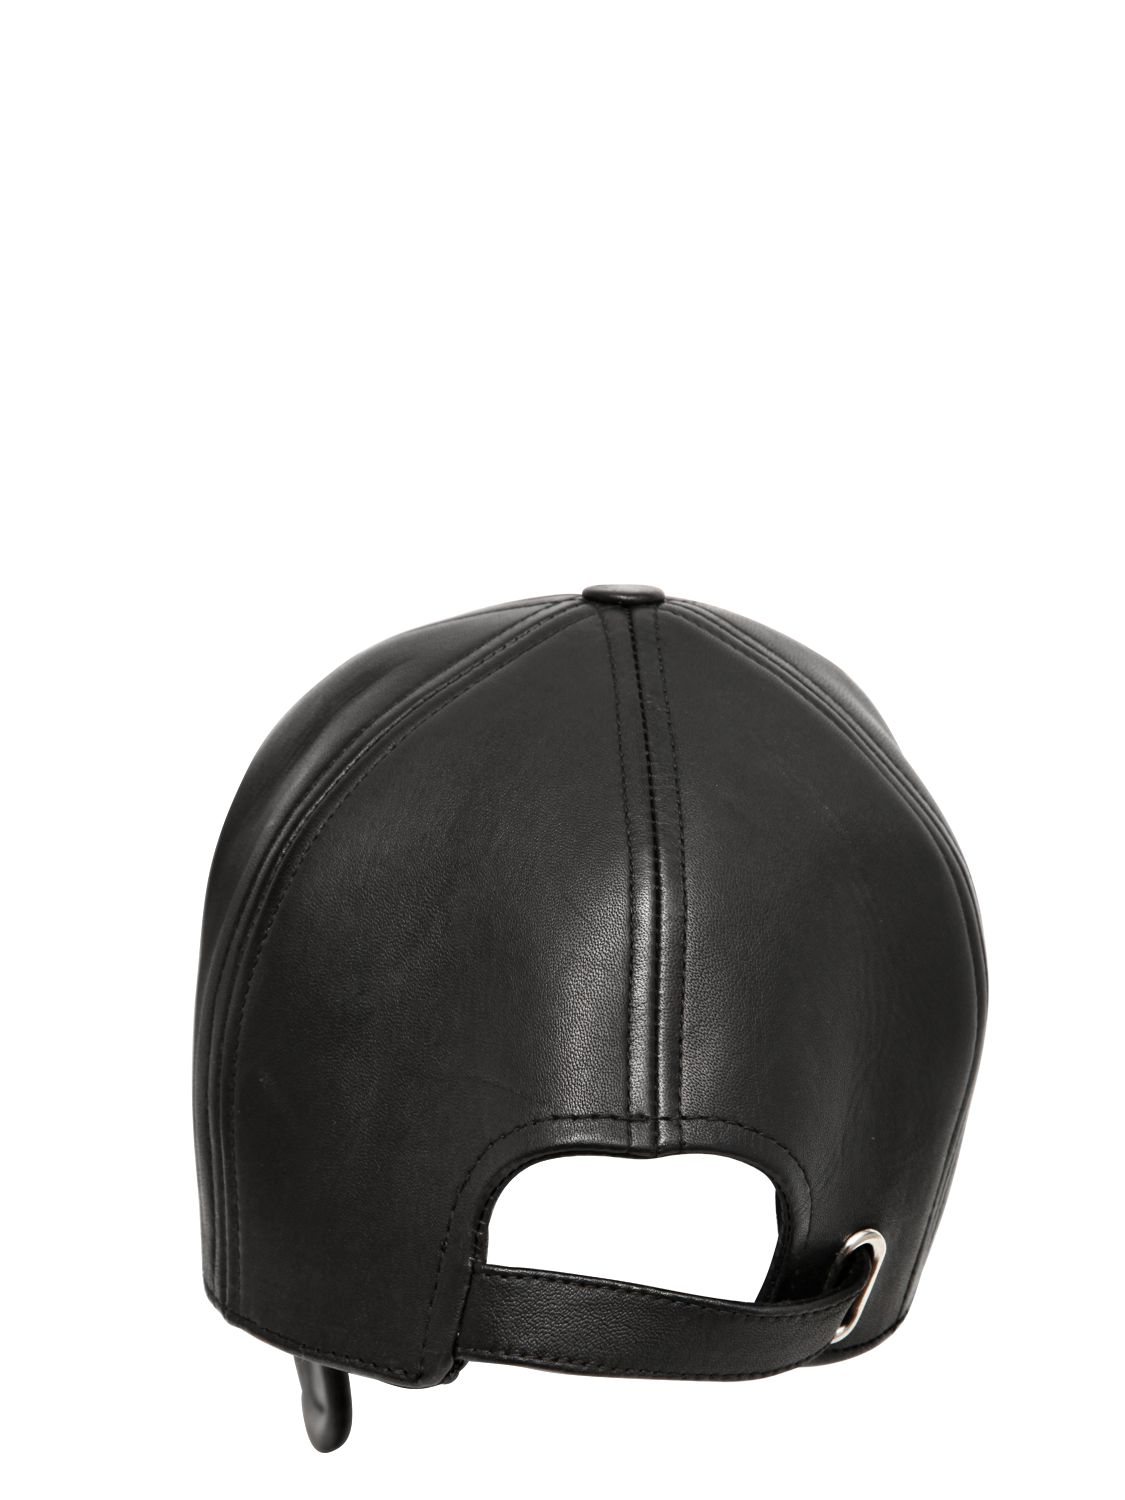 KTZ Leather Crooked Baseball Cap in Black for Men - Lyst